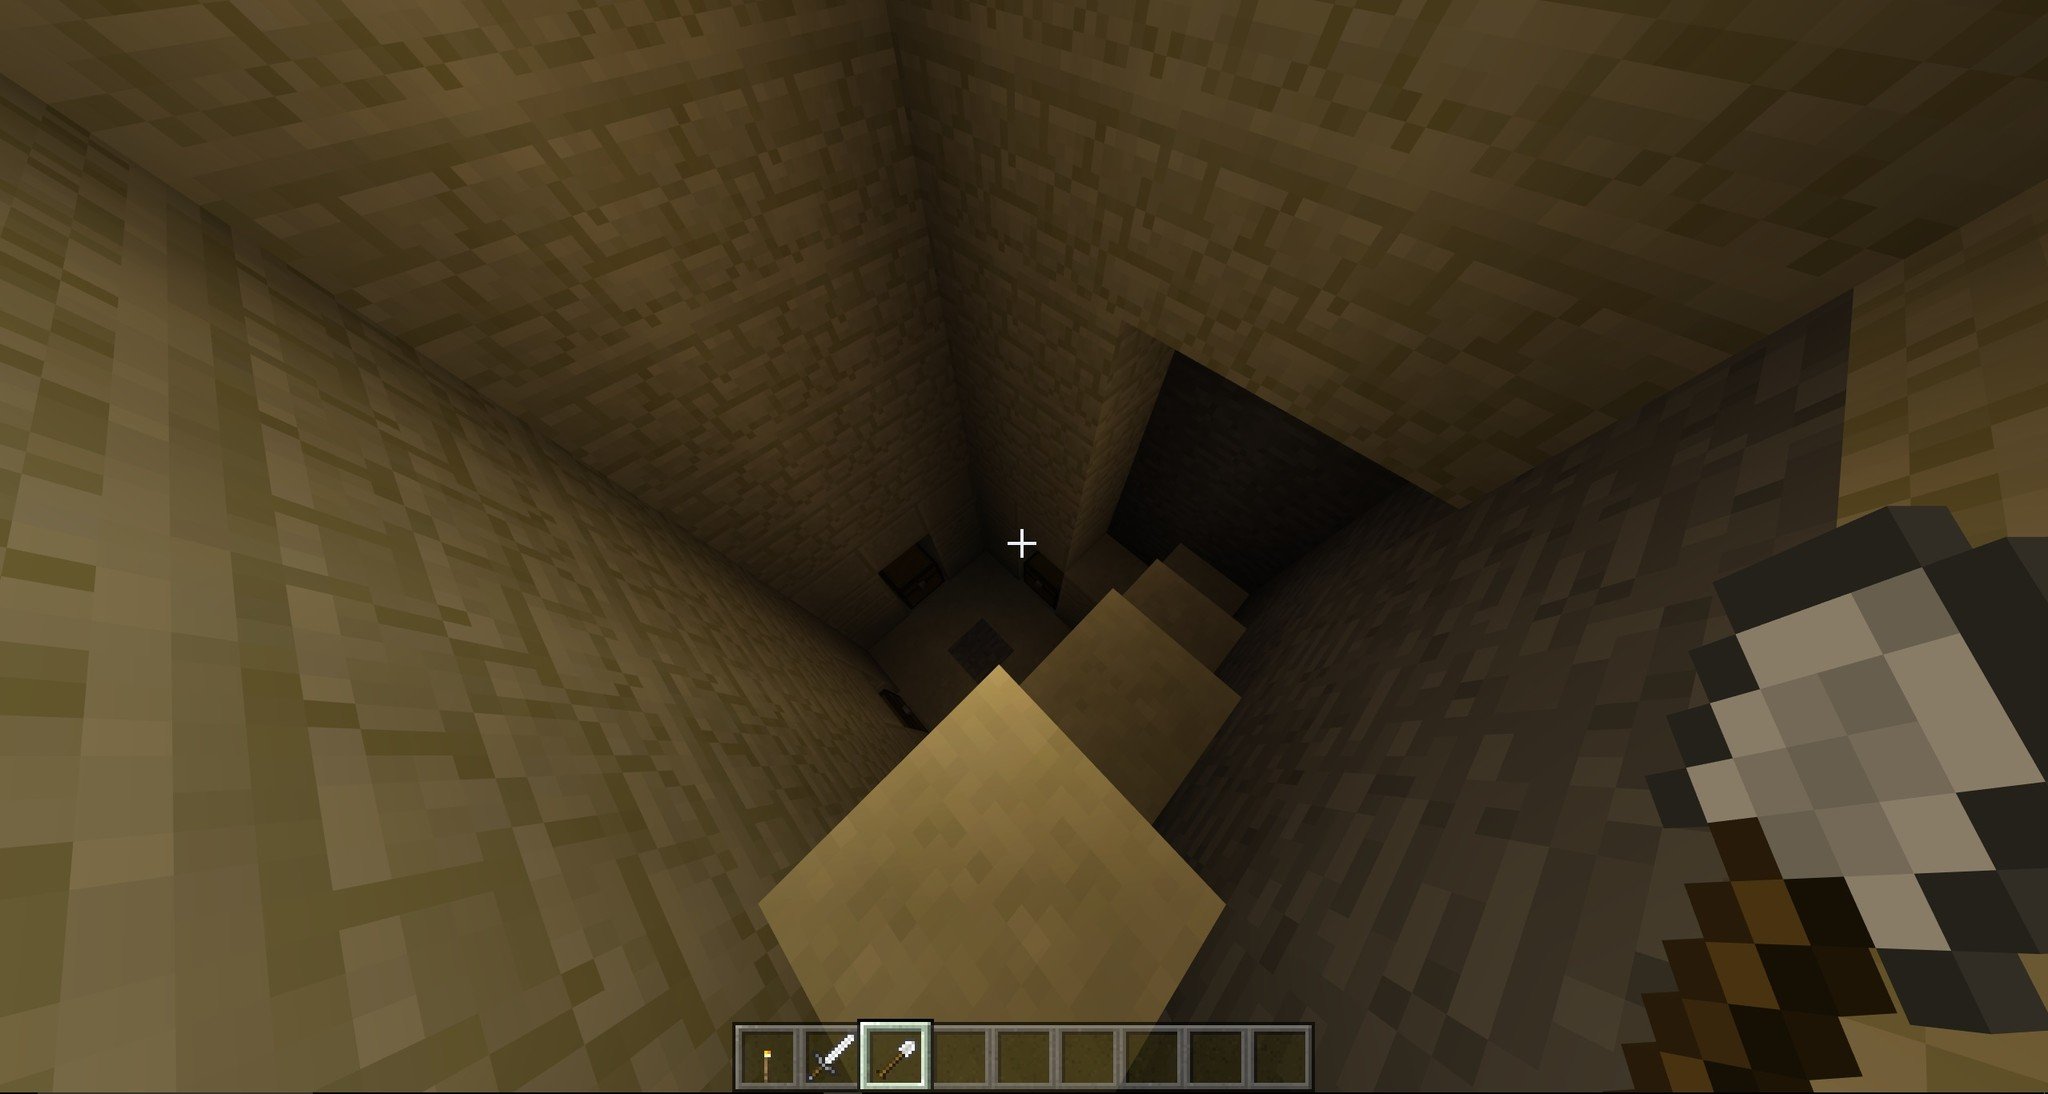 Dig some stairs along the side of the treasure room.